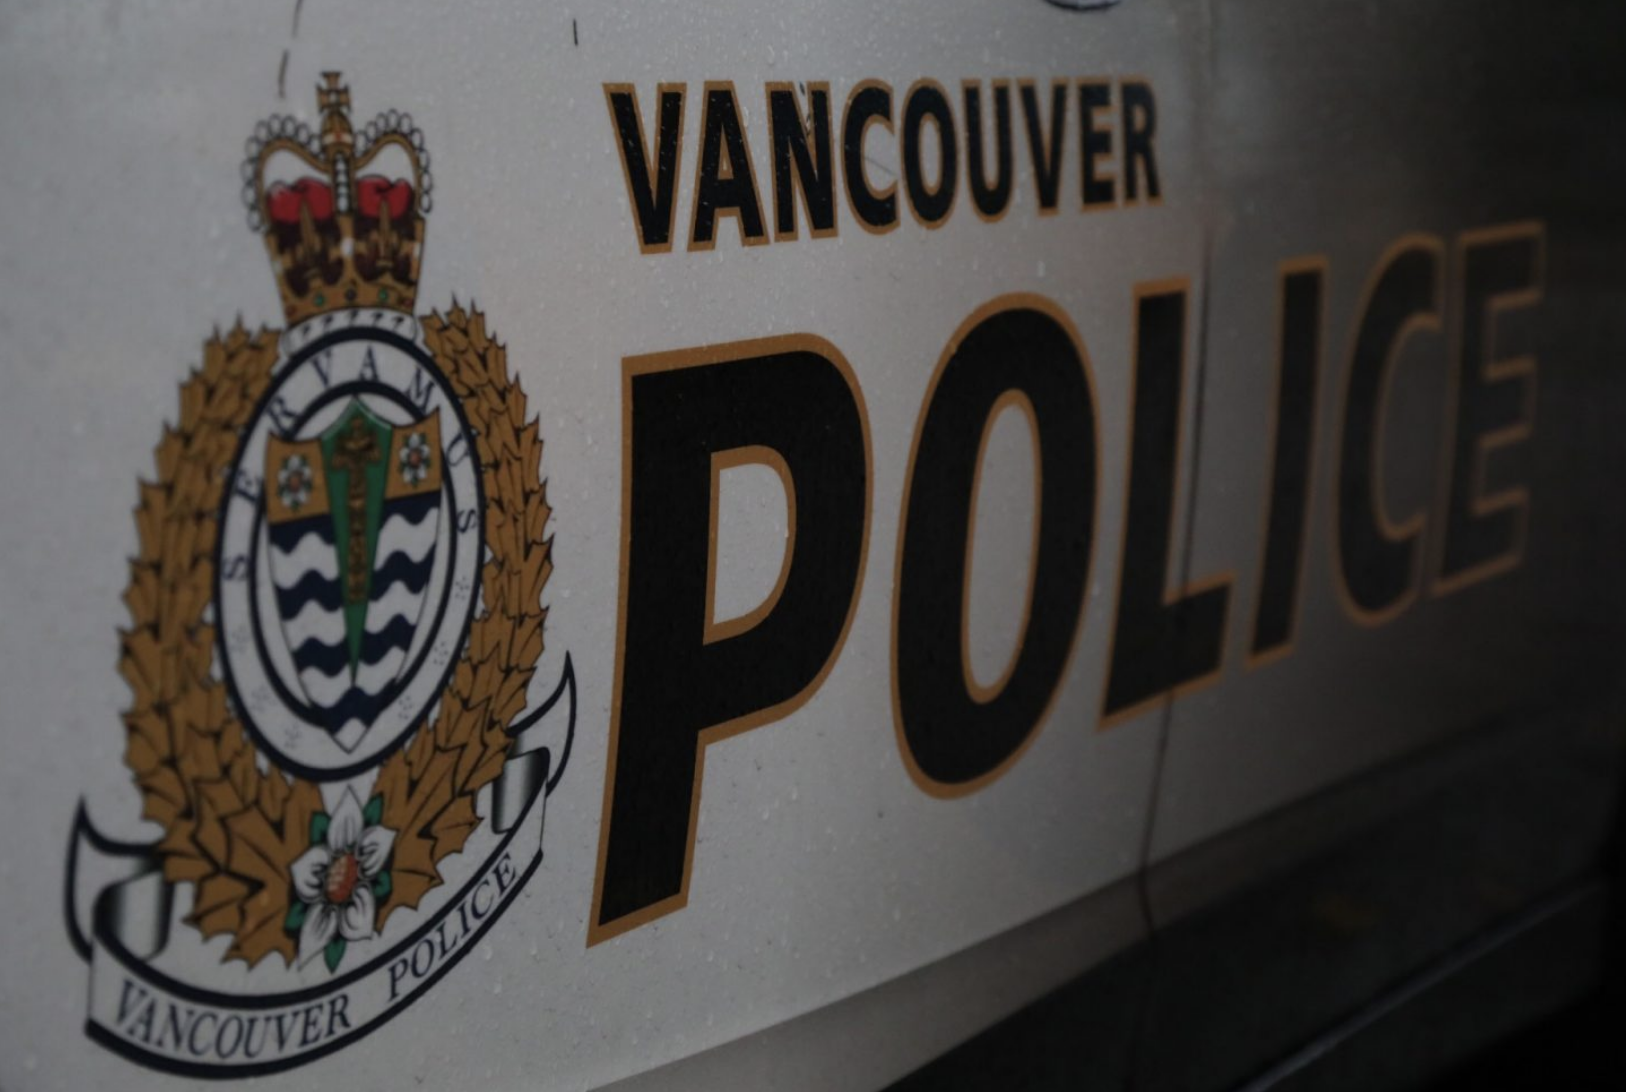 Vancouver: Two people suffered life-threatening injuries after violent assault